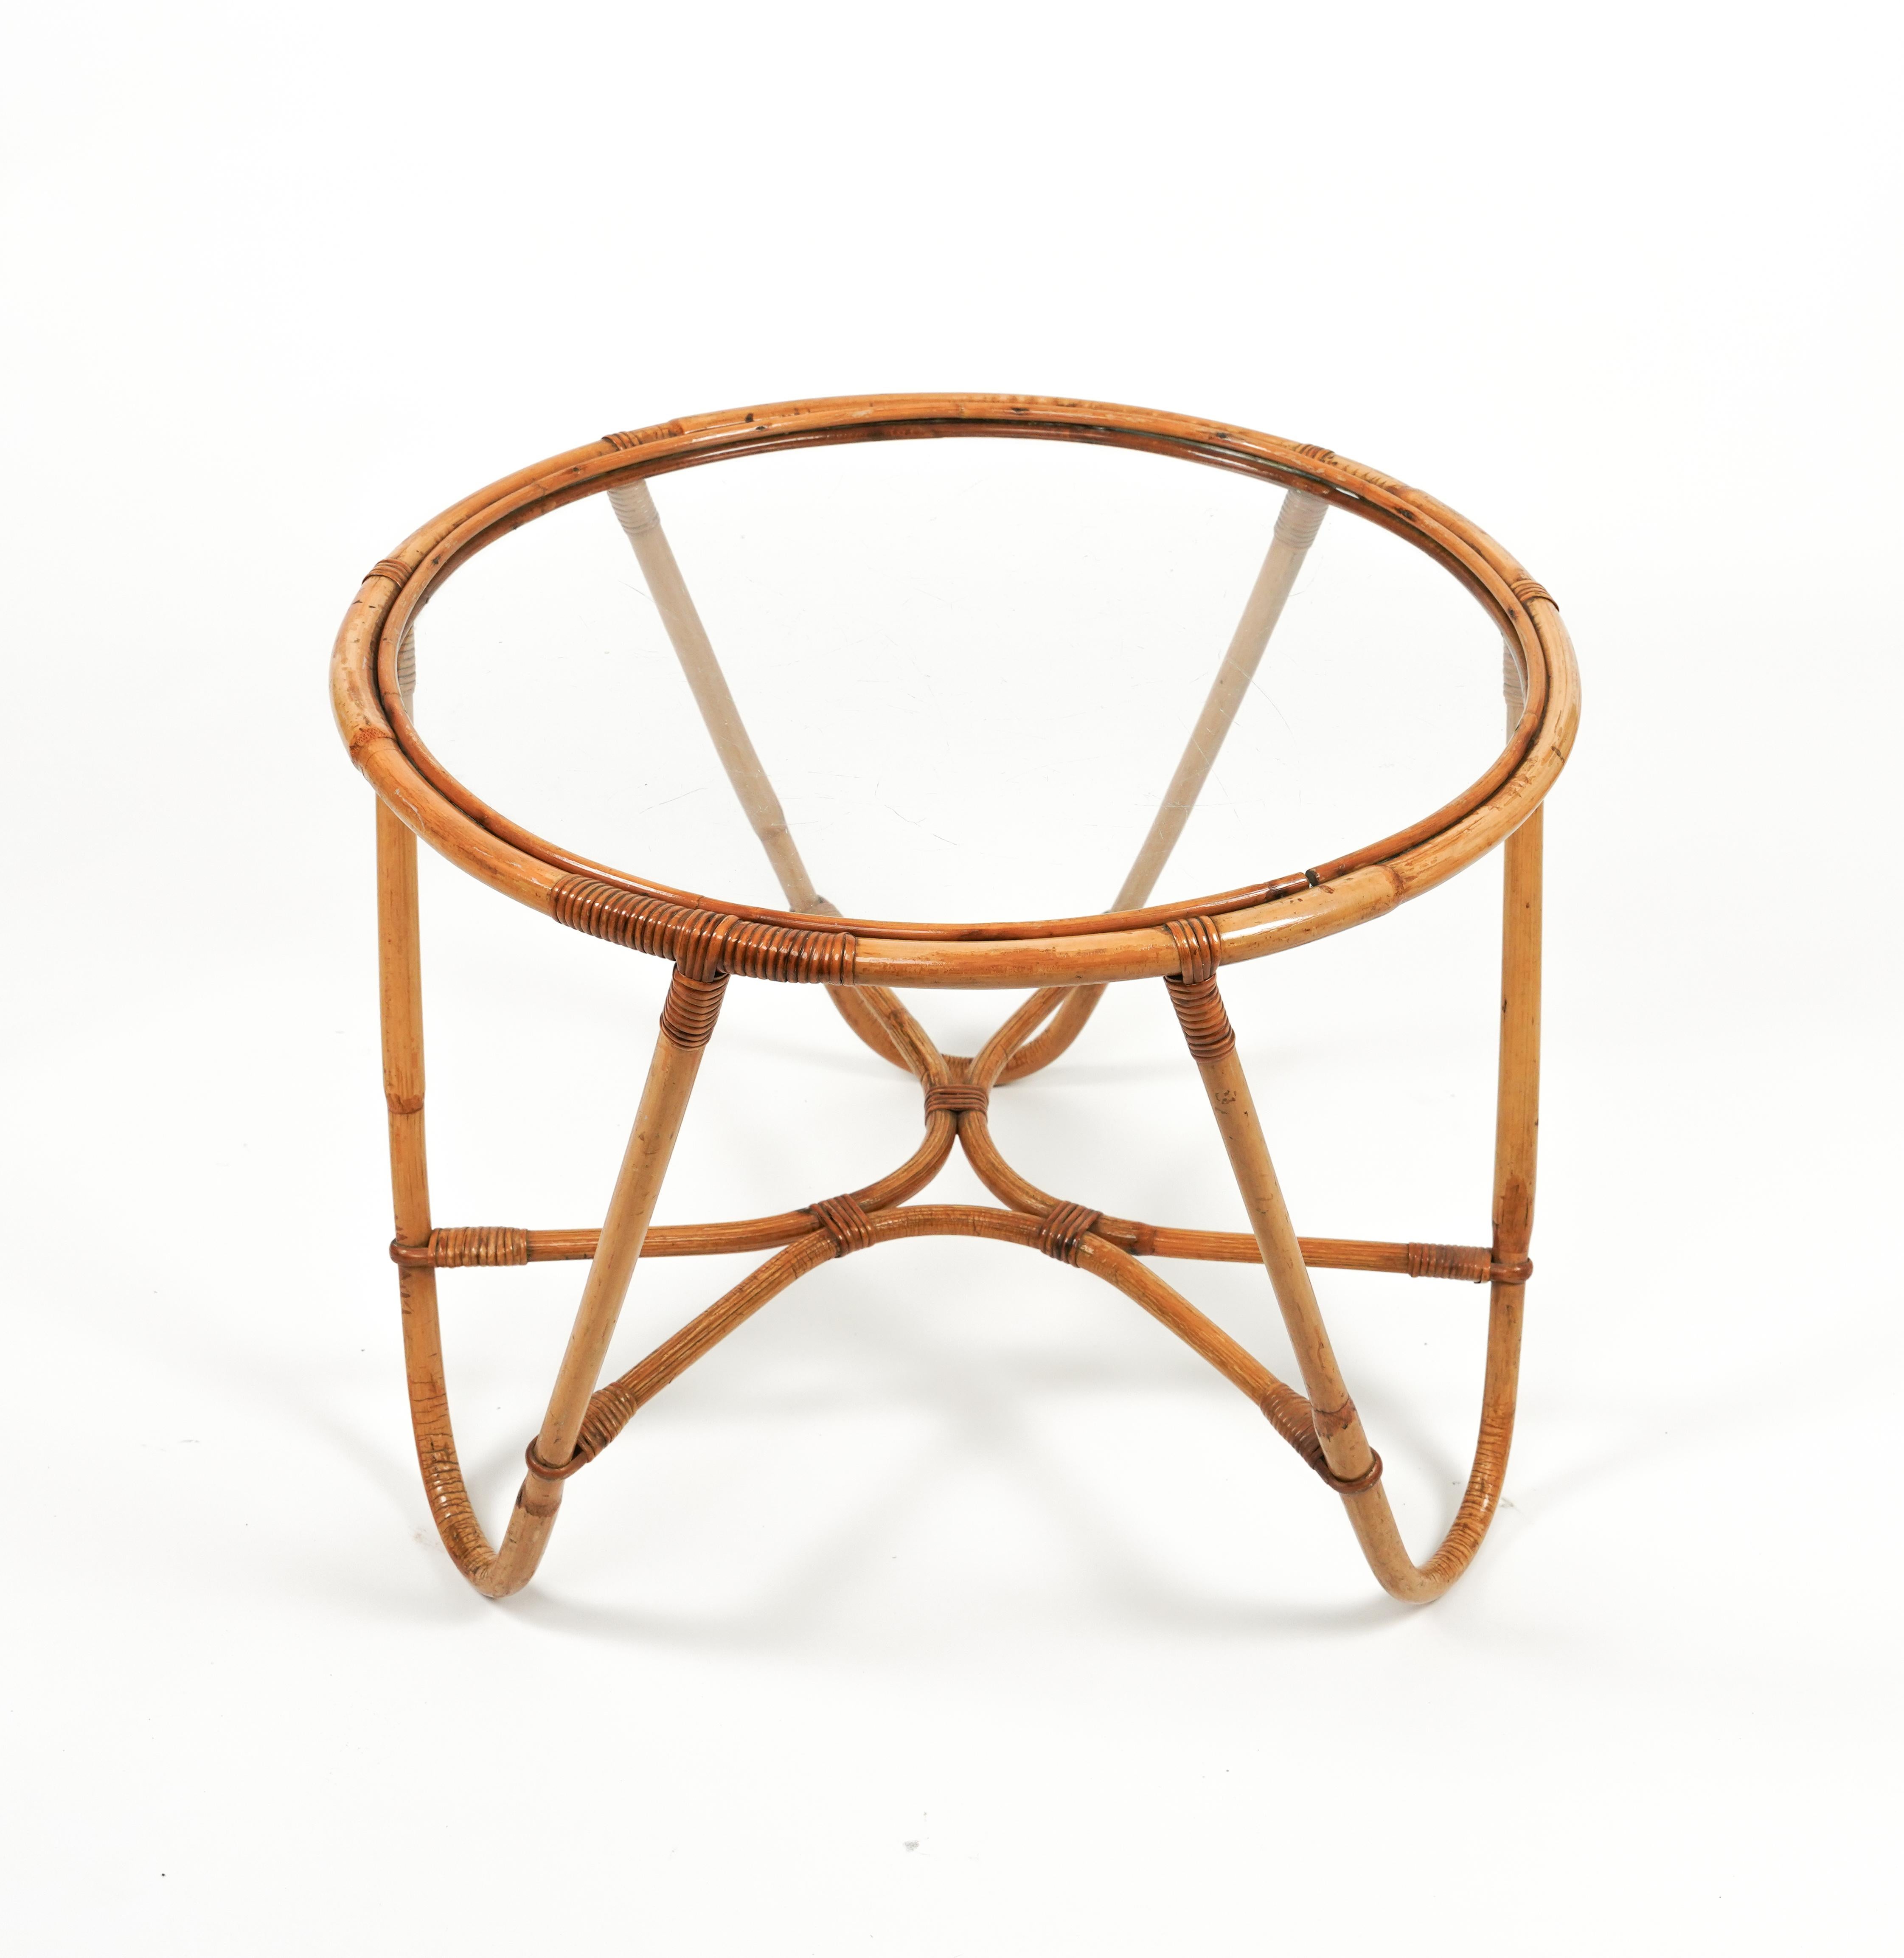 Midcentury Round Coffee Table in Bamboo, Rattan and Glass, Italy 1960s For Sale 1